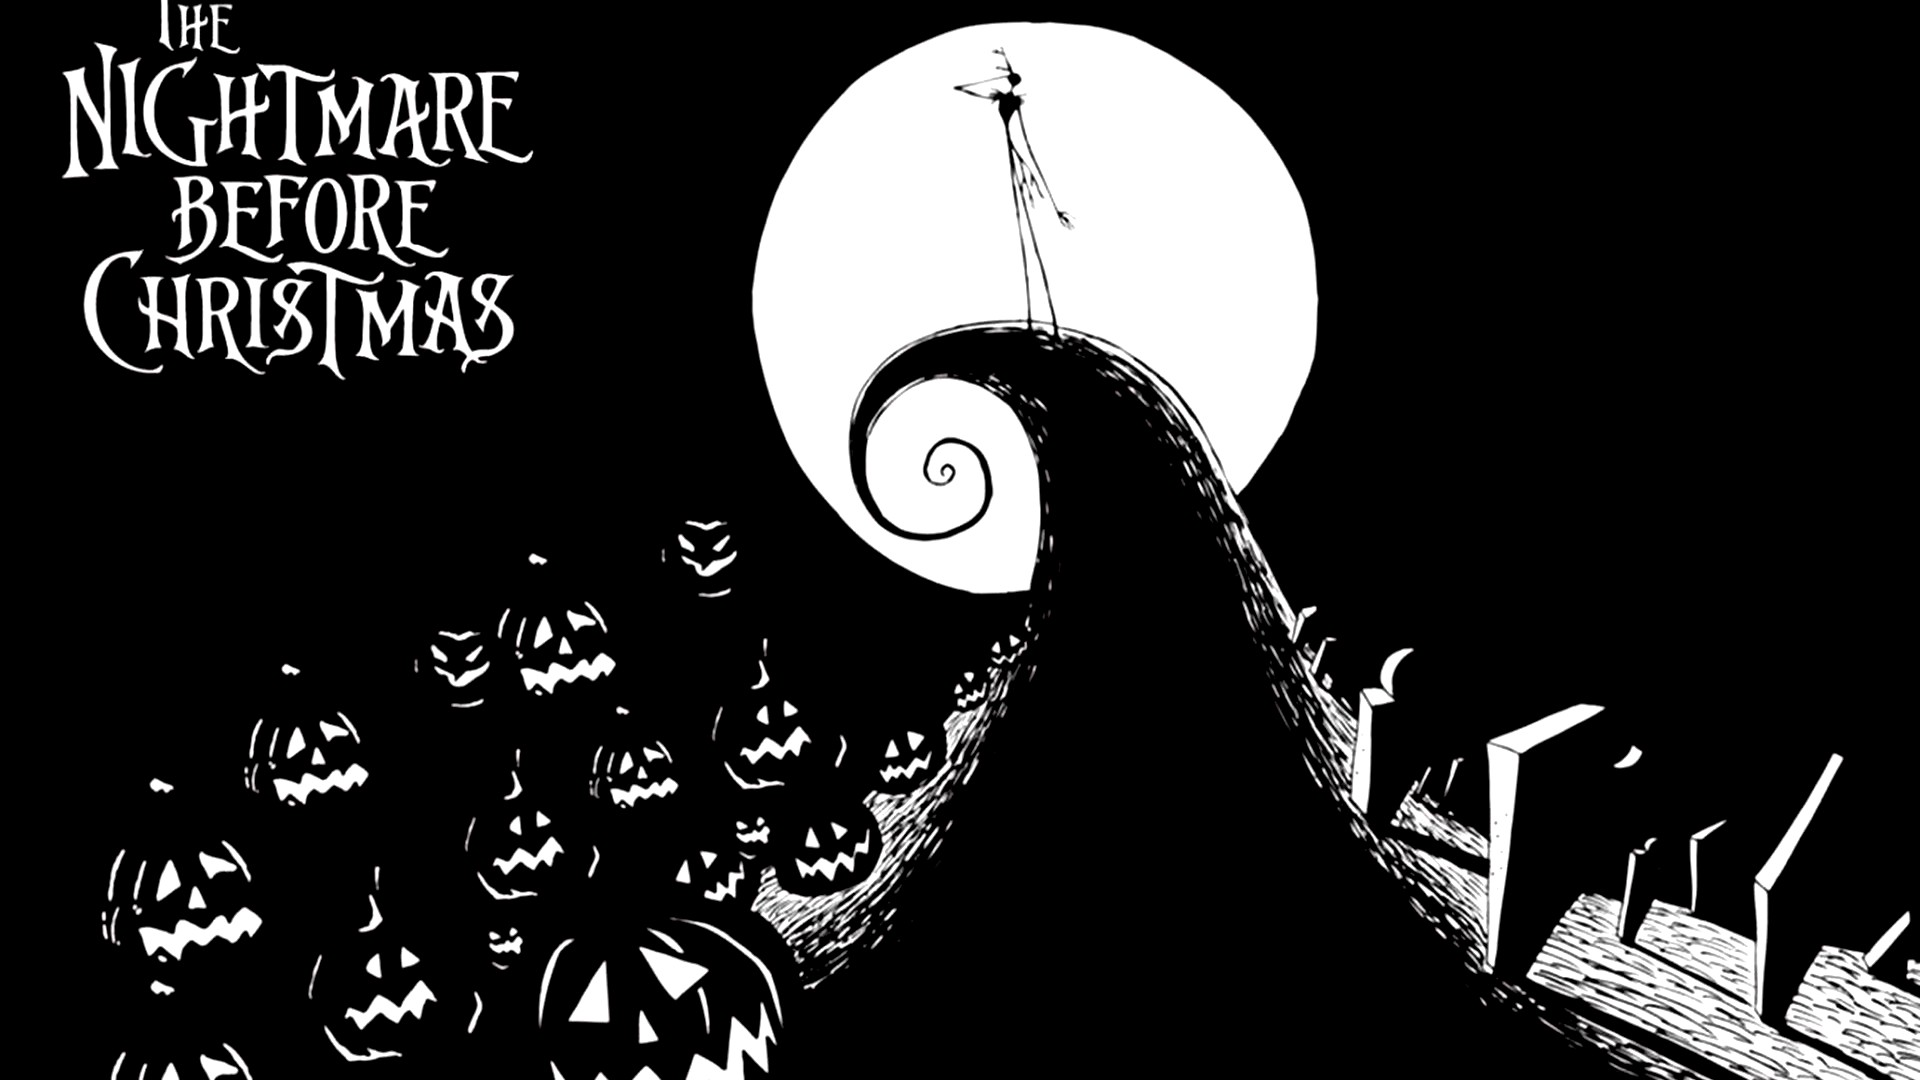 The Nightmare Before Christmas Trailer Wallpaper with high-resolution 1920x1080 pixel. You can use this poster wallpaper for your Desktop Computers, Mac Screensavers, Windows Backgrounds, iPhone Wallpapers, Tablet or Android Lock screen and another Mobile device